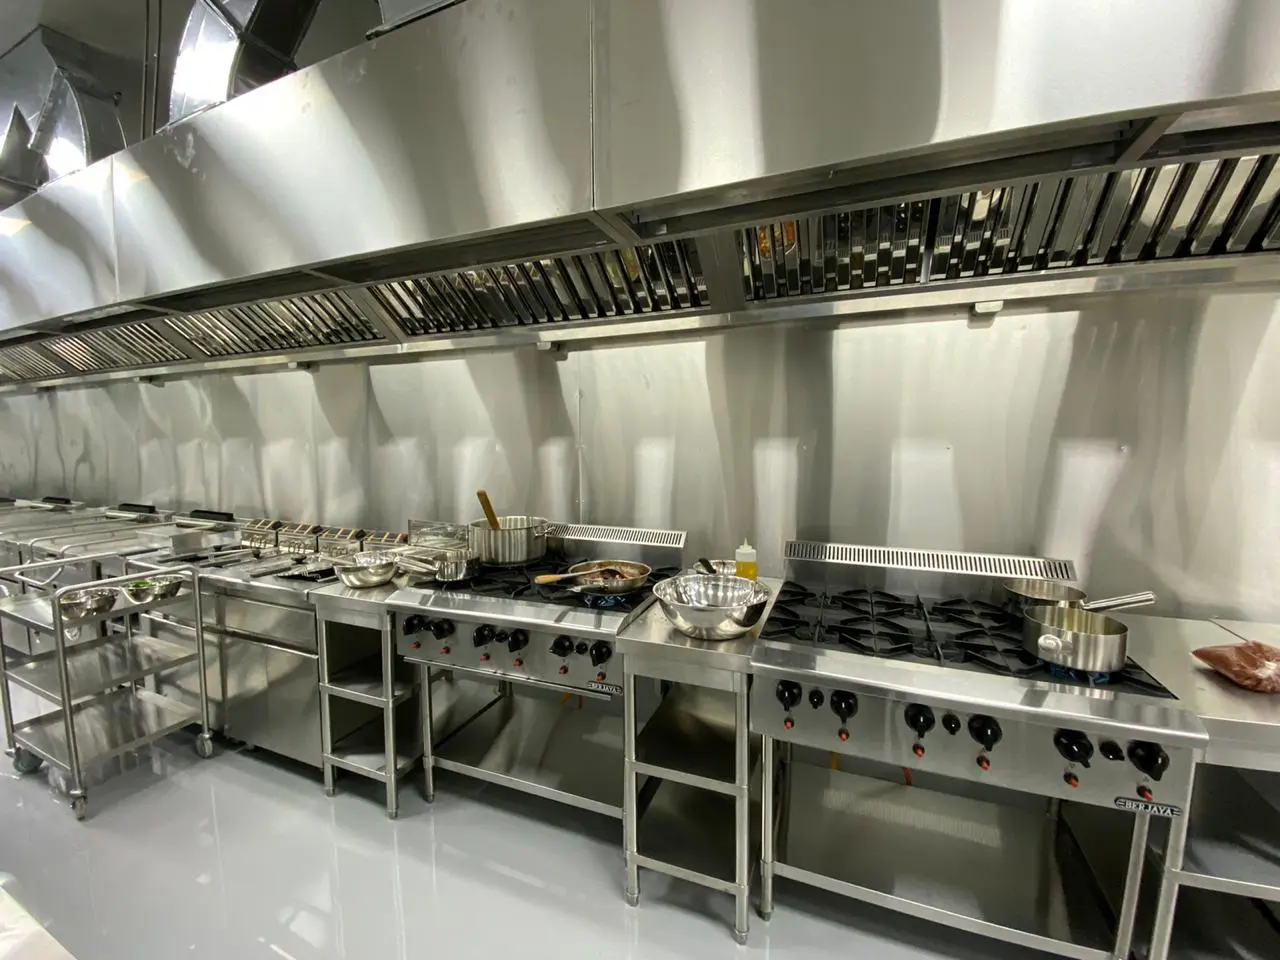 A kitchen with many different types of cooking equipment.